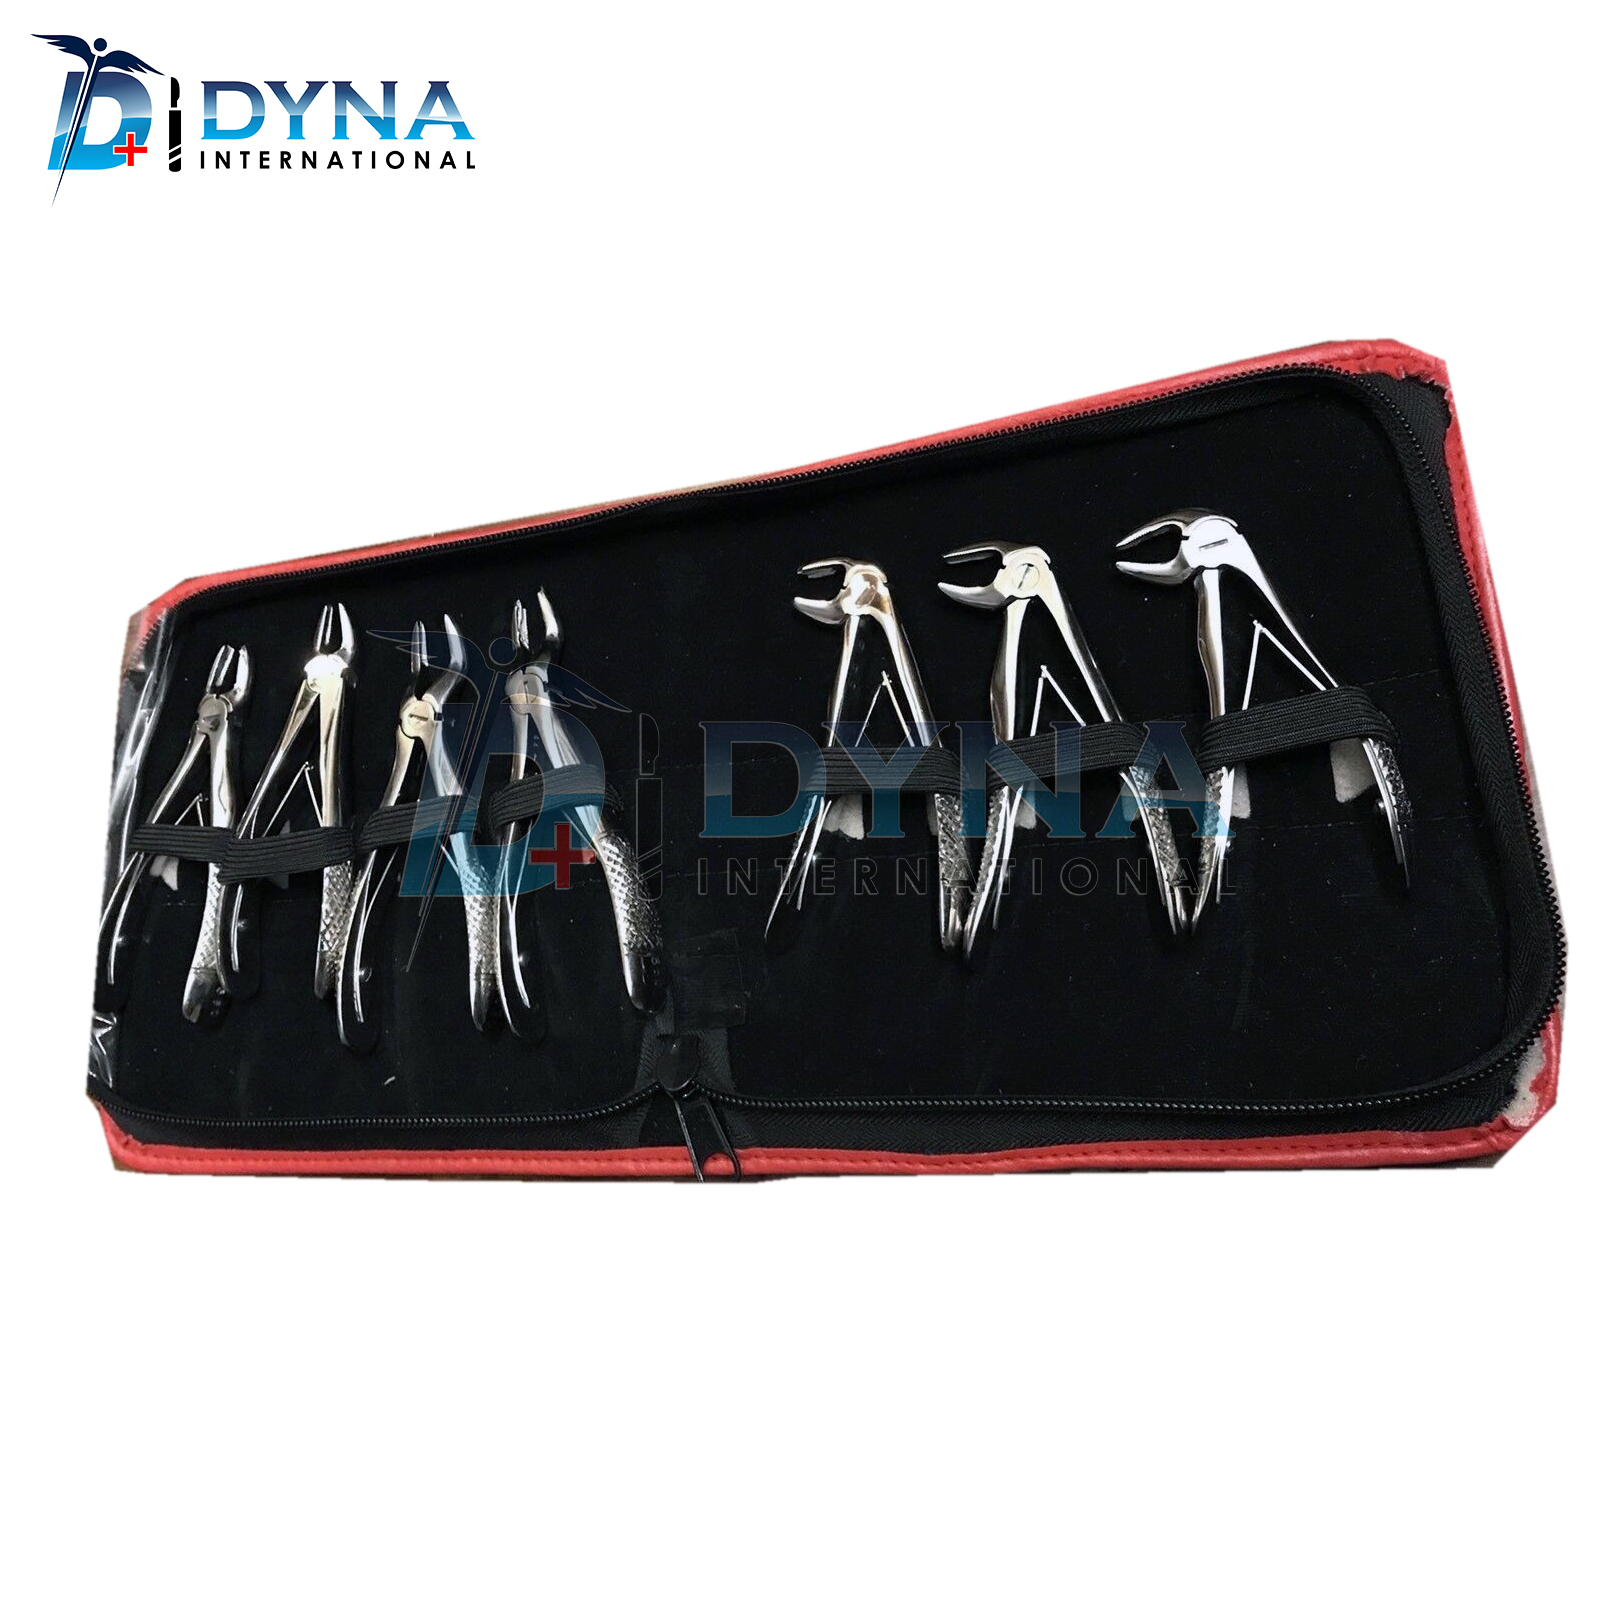 Pedo-Children-Dental-Extracting-Forceps-Kit-7-Pcs-With-Pouch-Dental-Instruments-5.jpg